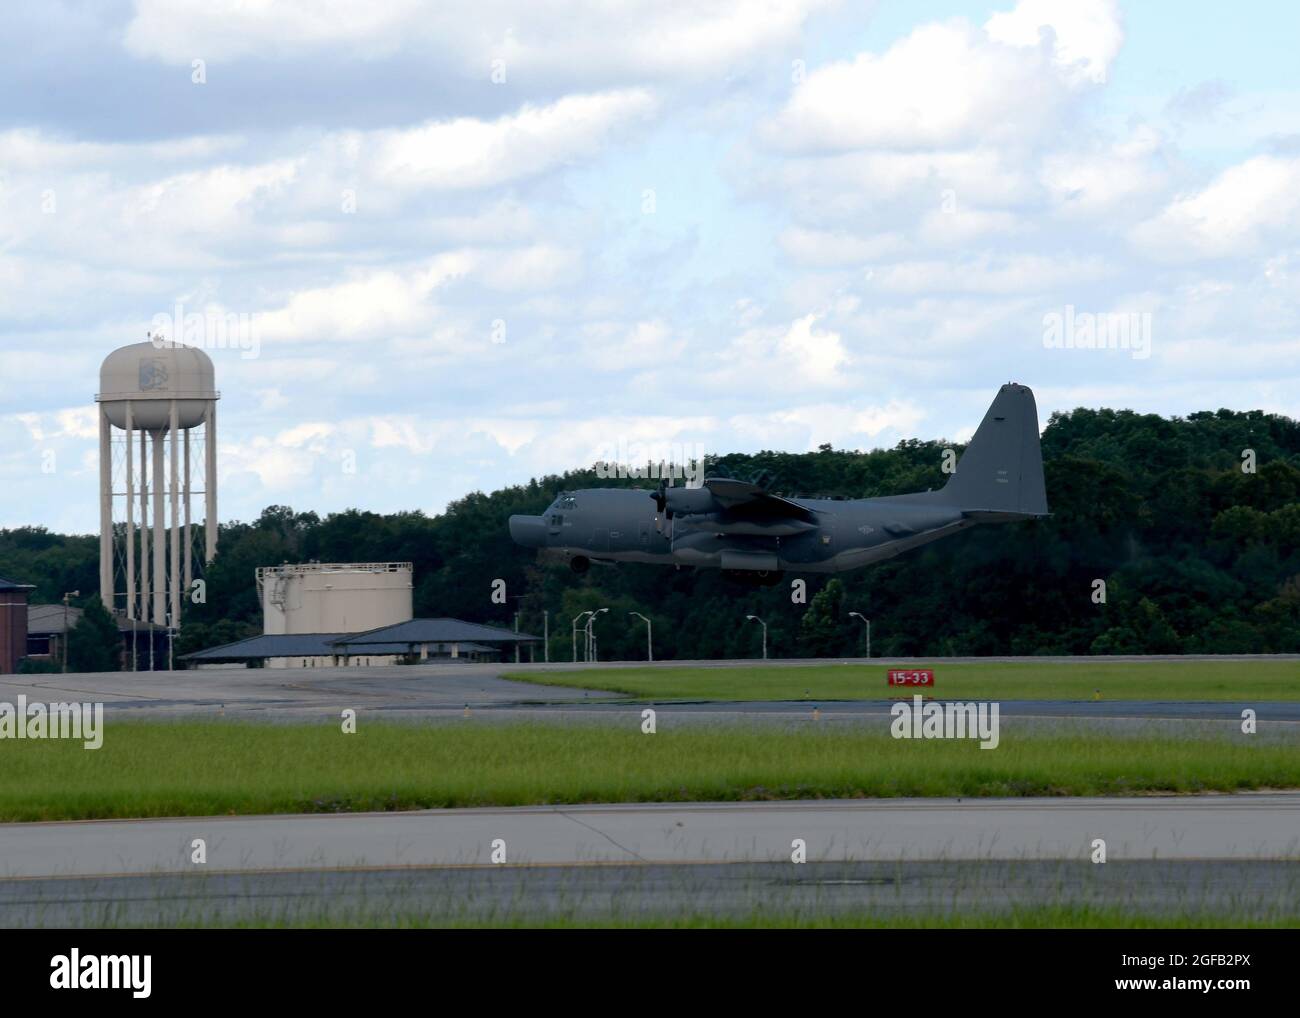 The final MC-130H Combat Talon II aircraft to receive programmed depot maintenance at the Warner Robins Air Logistics Complex, takes off at Robins Air Force Base, Georgia, Aug. 20, 2021. The MC-130H returned to support missions at Hurlburt Field, Florida. Stock Photo